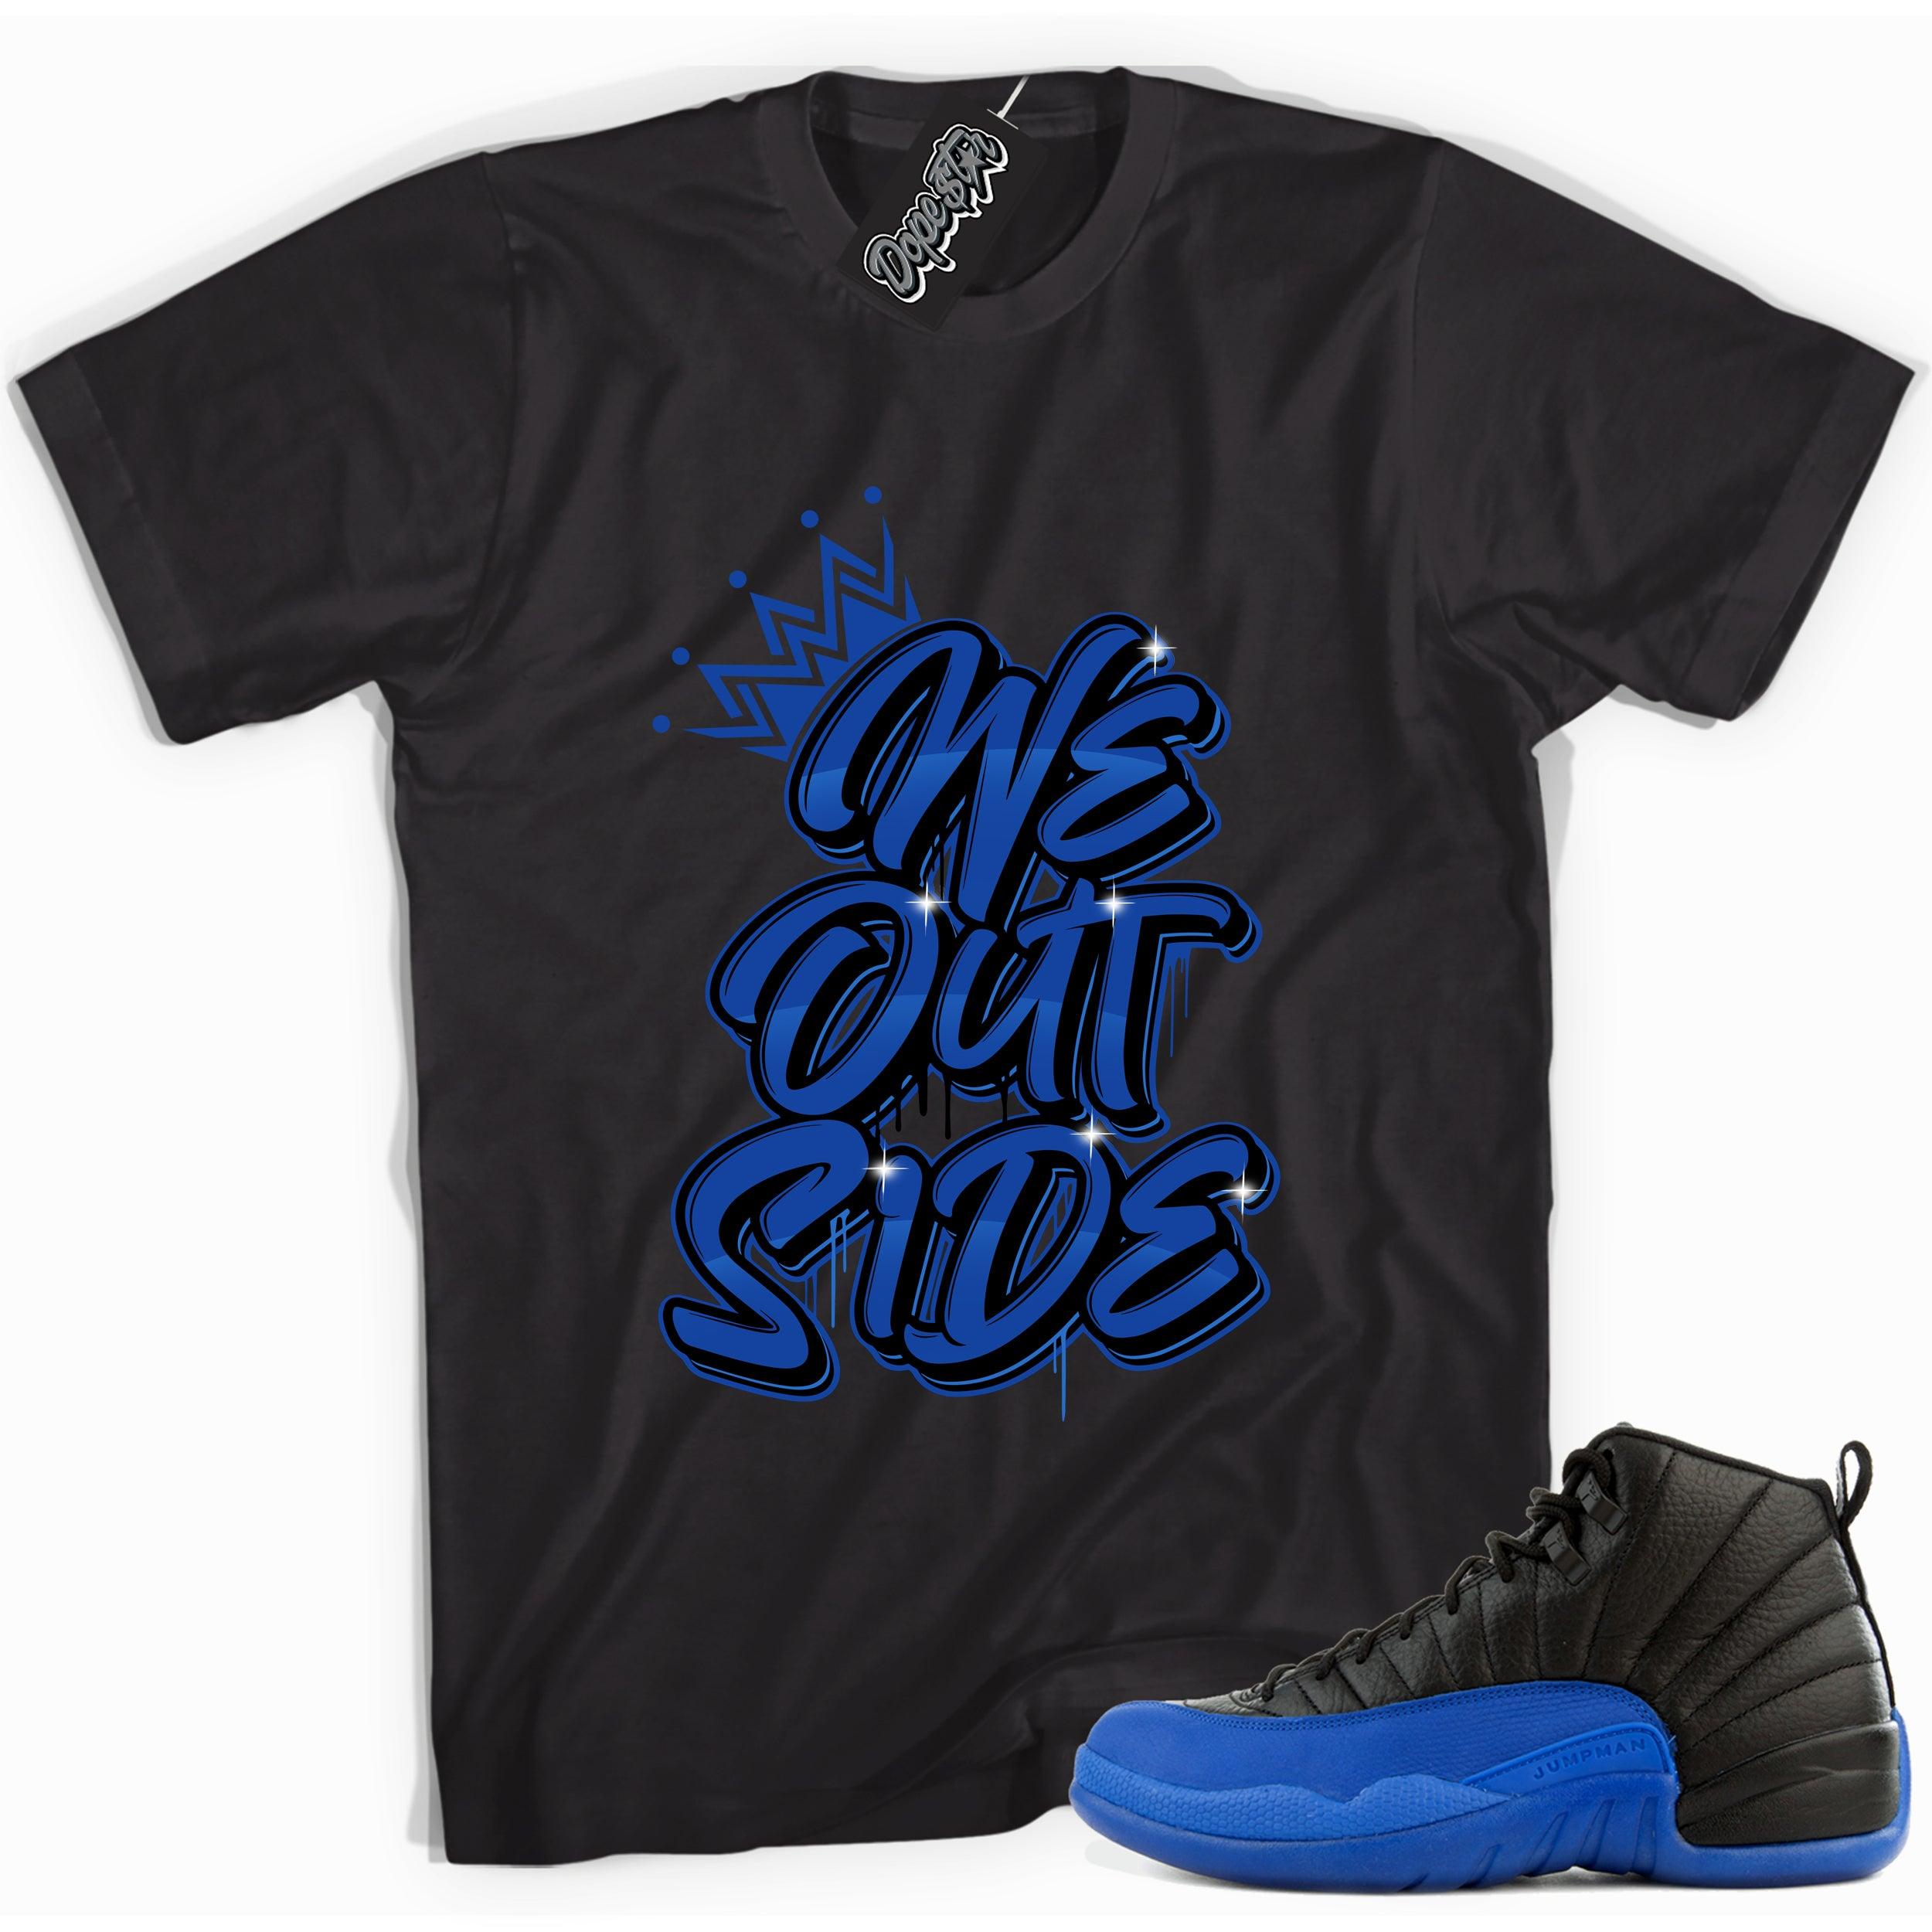 Cool black graphic tee with 'we outside' print, that perfectly matches  Air Jordan 12 Retro Black Game Royal sneakers.